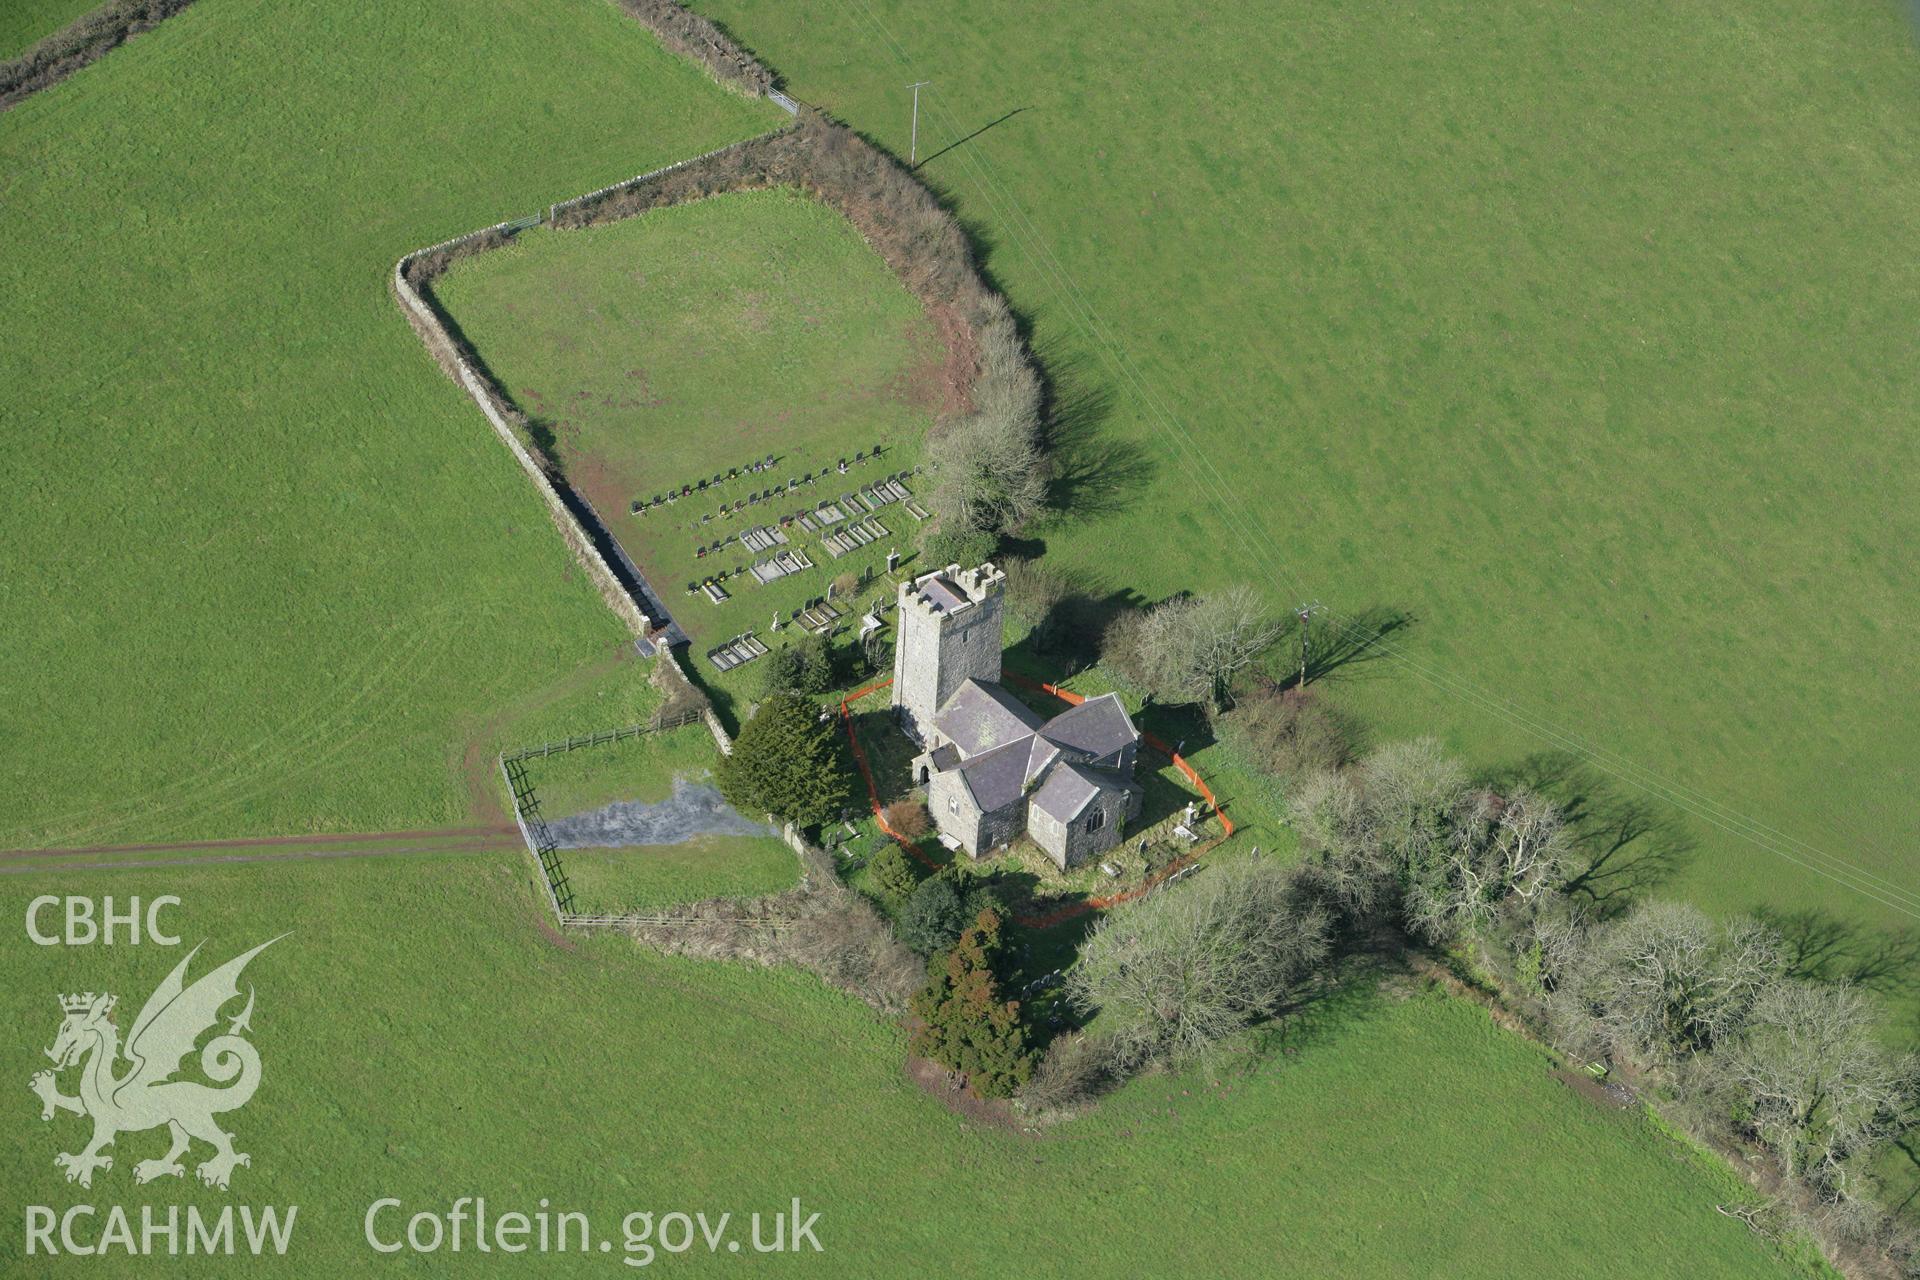 RCAHMW colour oblique aerial photograph of St Elidyr's Church, Crunwere, from the south-east. Taken on 04 March 2008 by Toby Driver